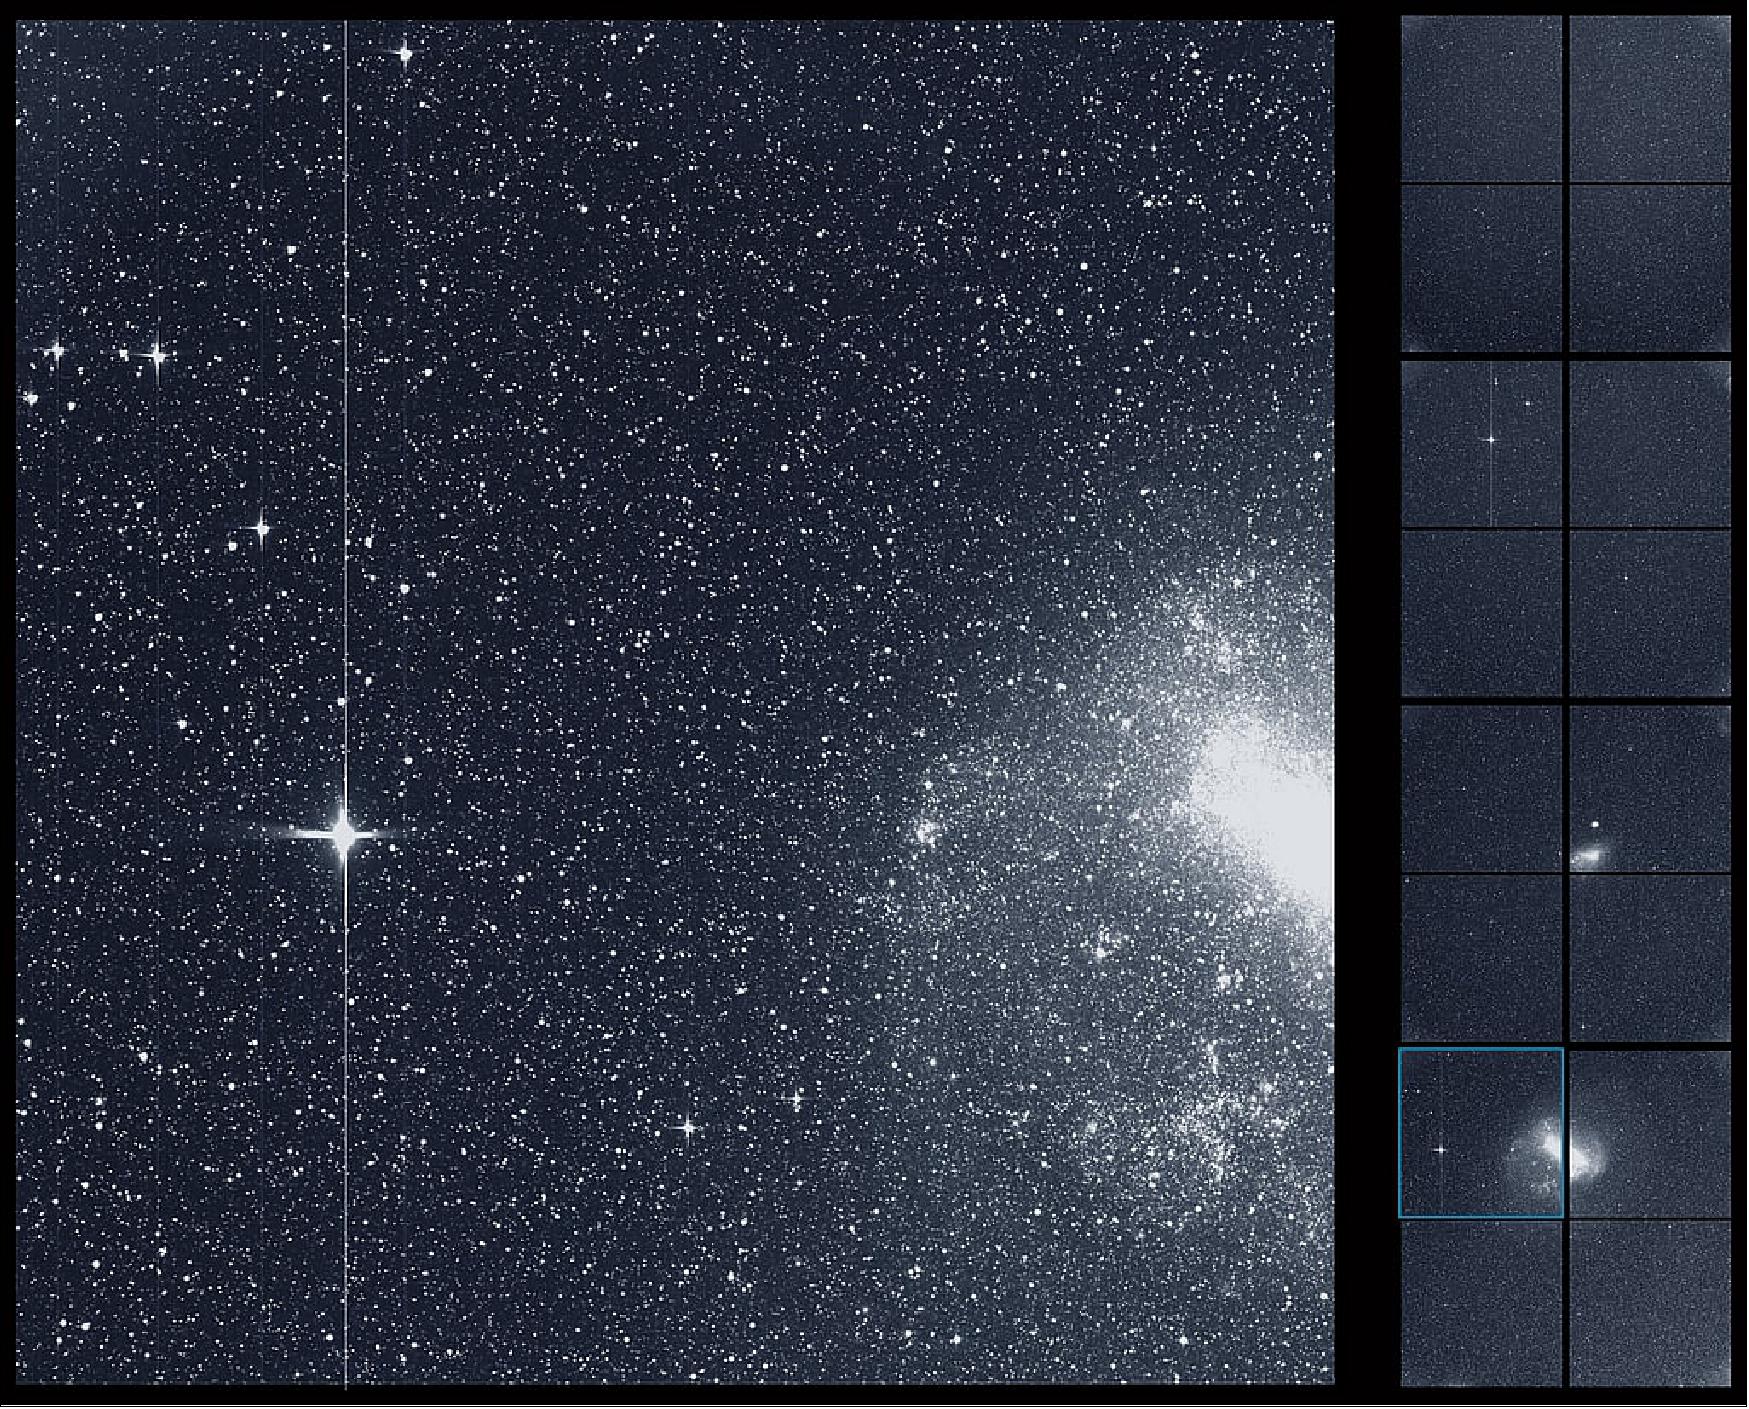 Figure 59: TESS took this snapshot of the Large Magellanic Cloud (right) and the bright star R Doradus (left) with just a single detector of one of its cameras on 7 Aug. 2018. The frame is part of a swath of the southern sky TESS captured in its “first light” science image as part of its initial round of data collection (image credit: NASA/MIT/TESS)